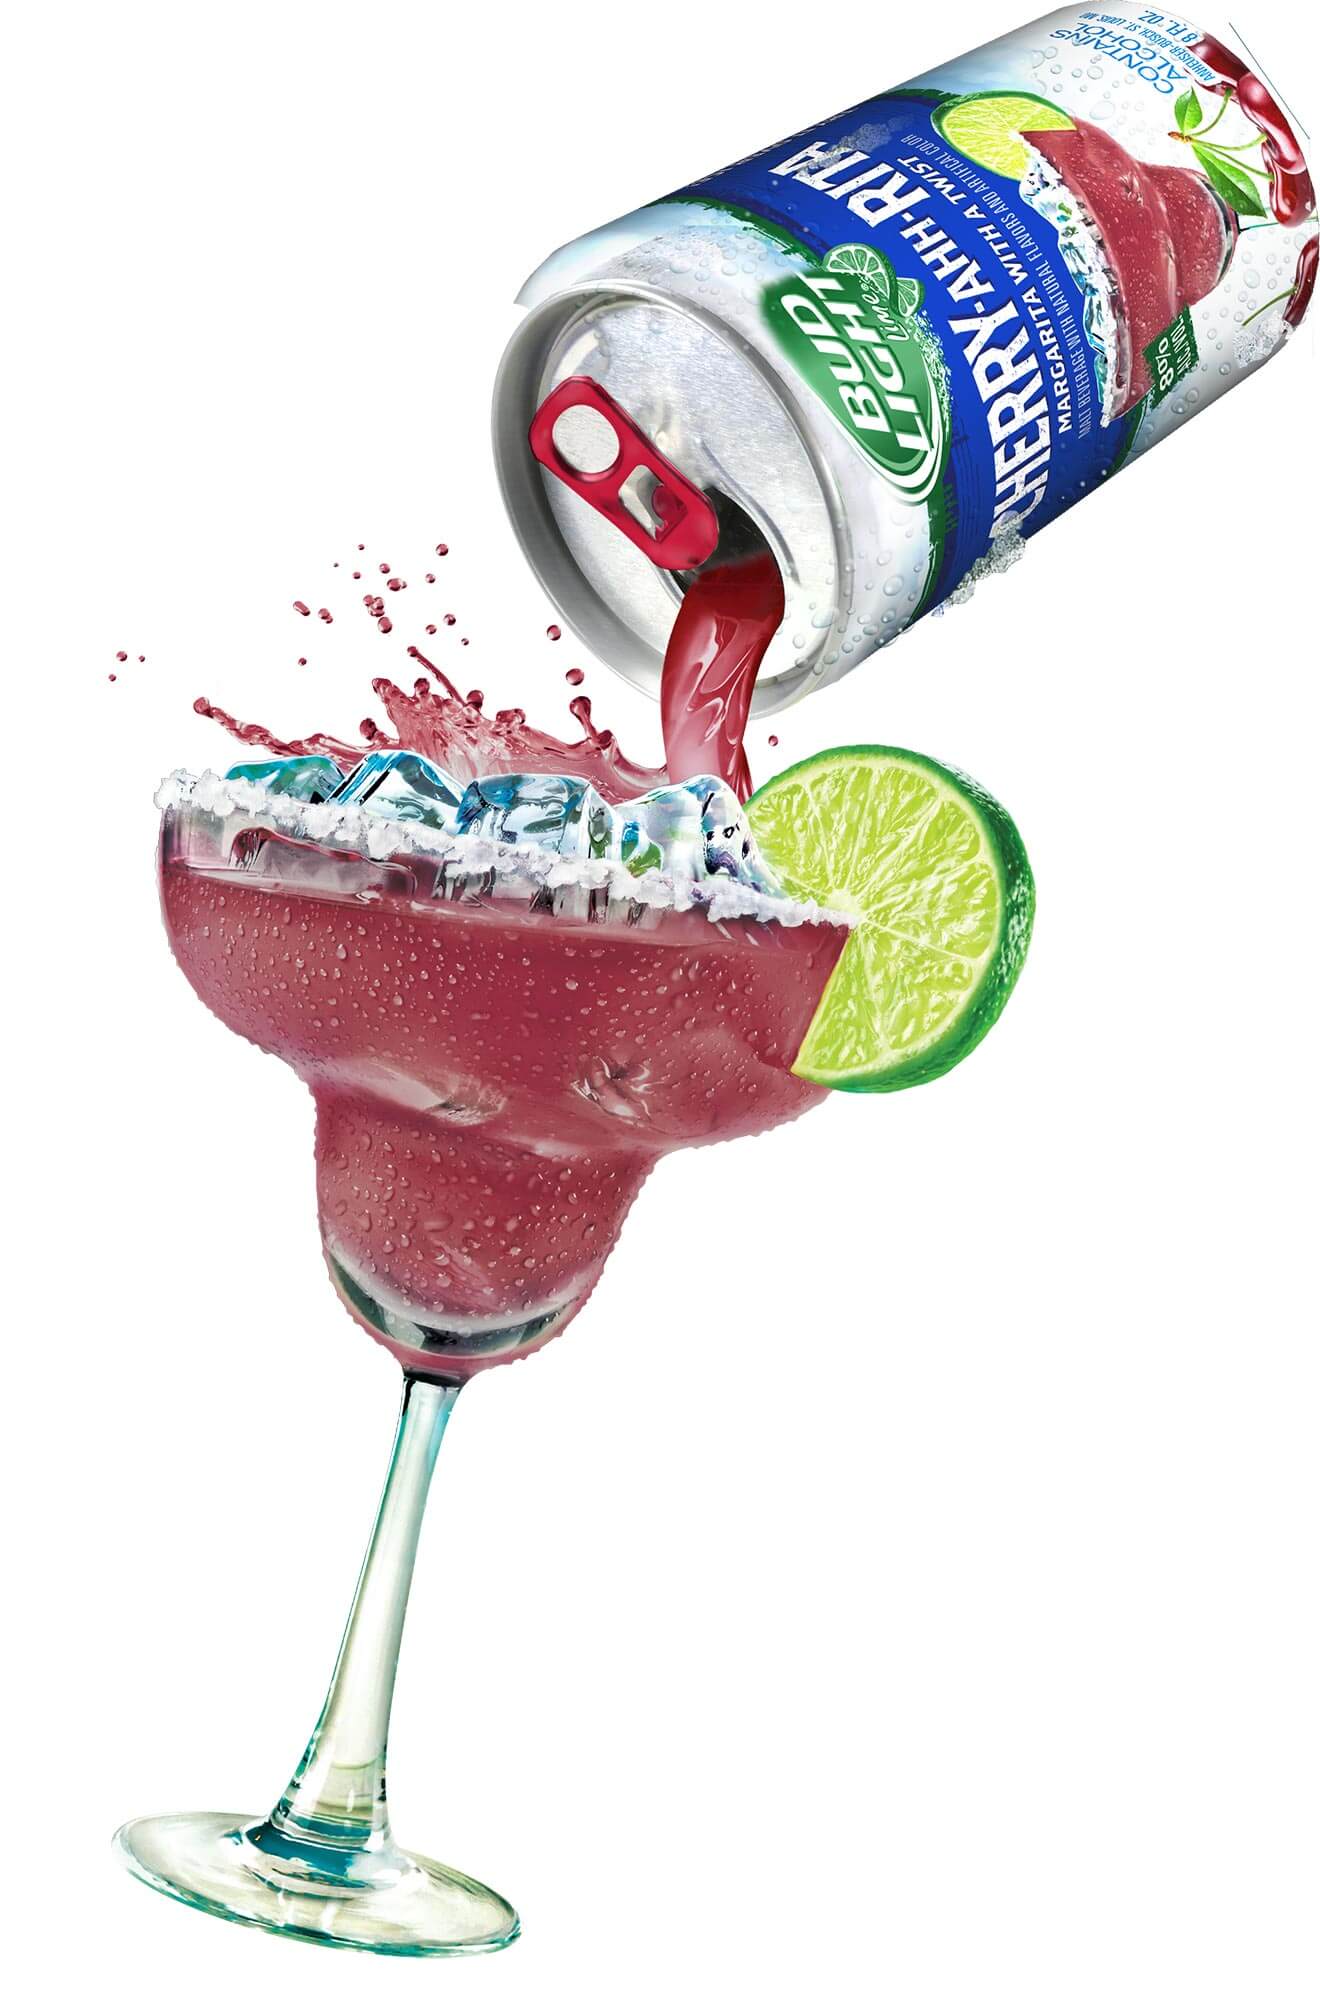 Lime-A-Rita Introduces Cherry-Ahh-Rita, pouring cocktail